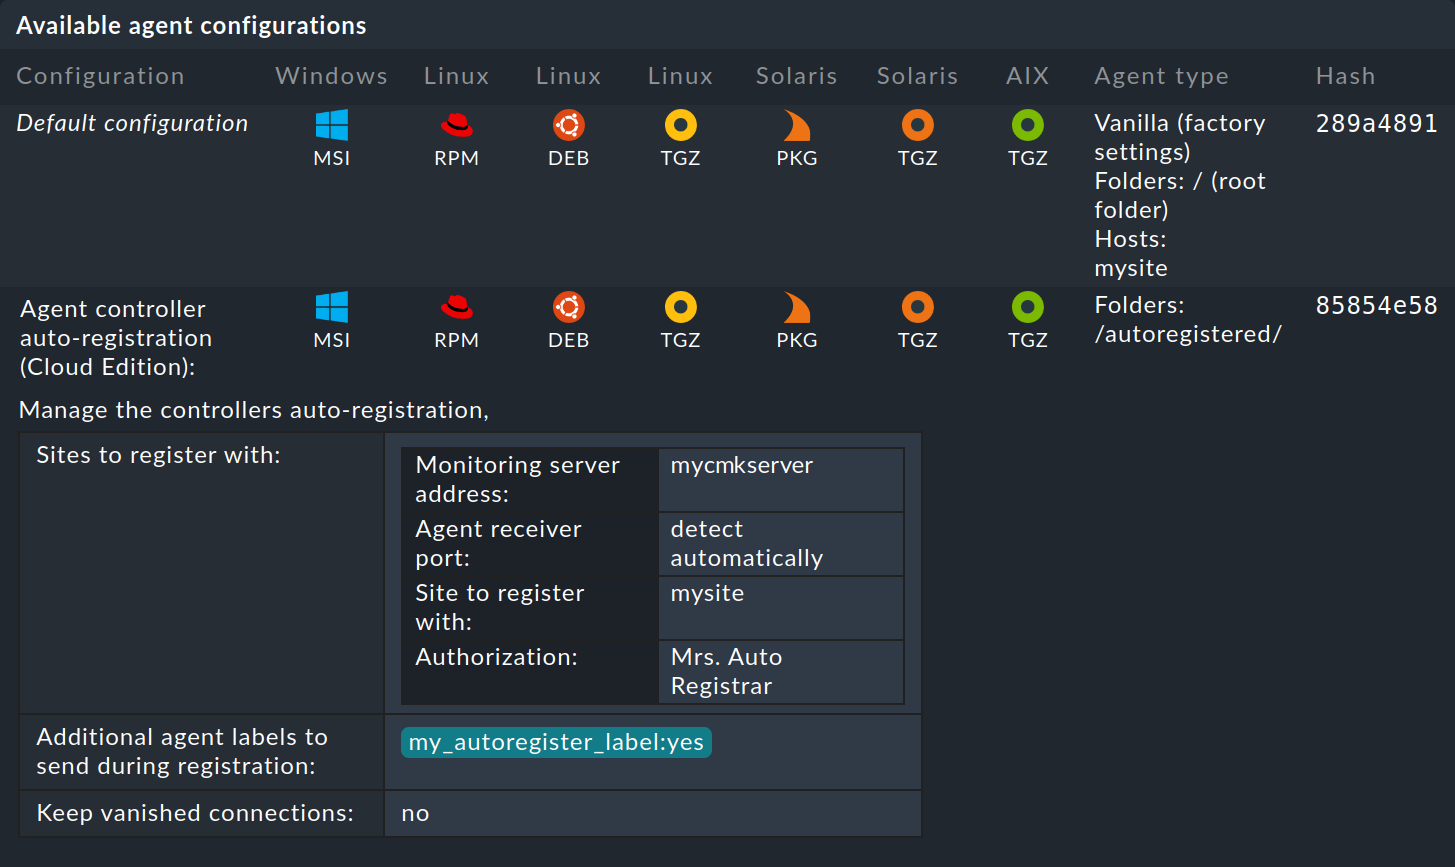 List with the new configurations of agents for auto-registration.